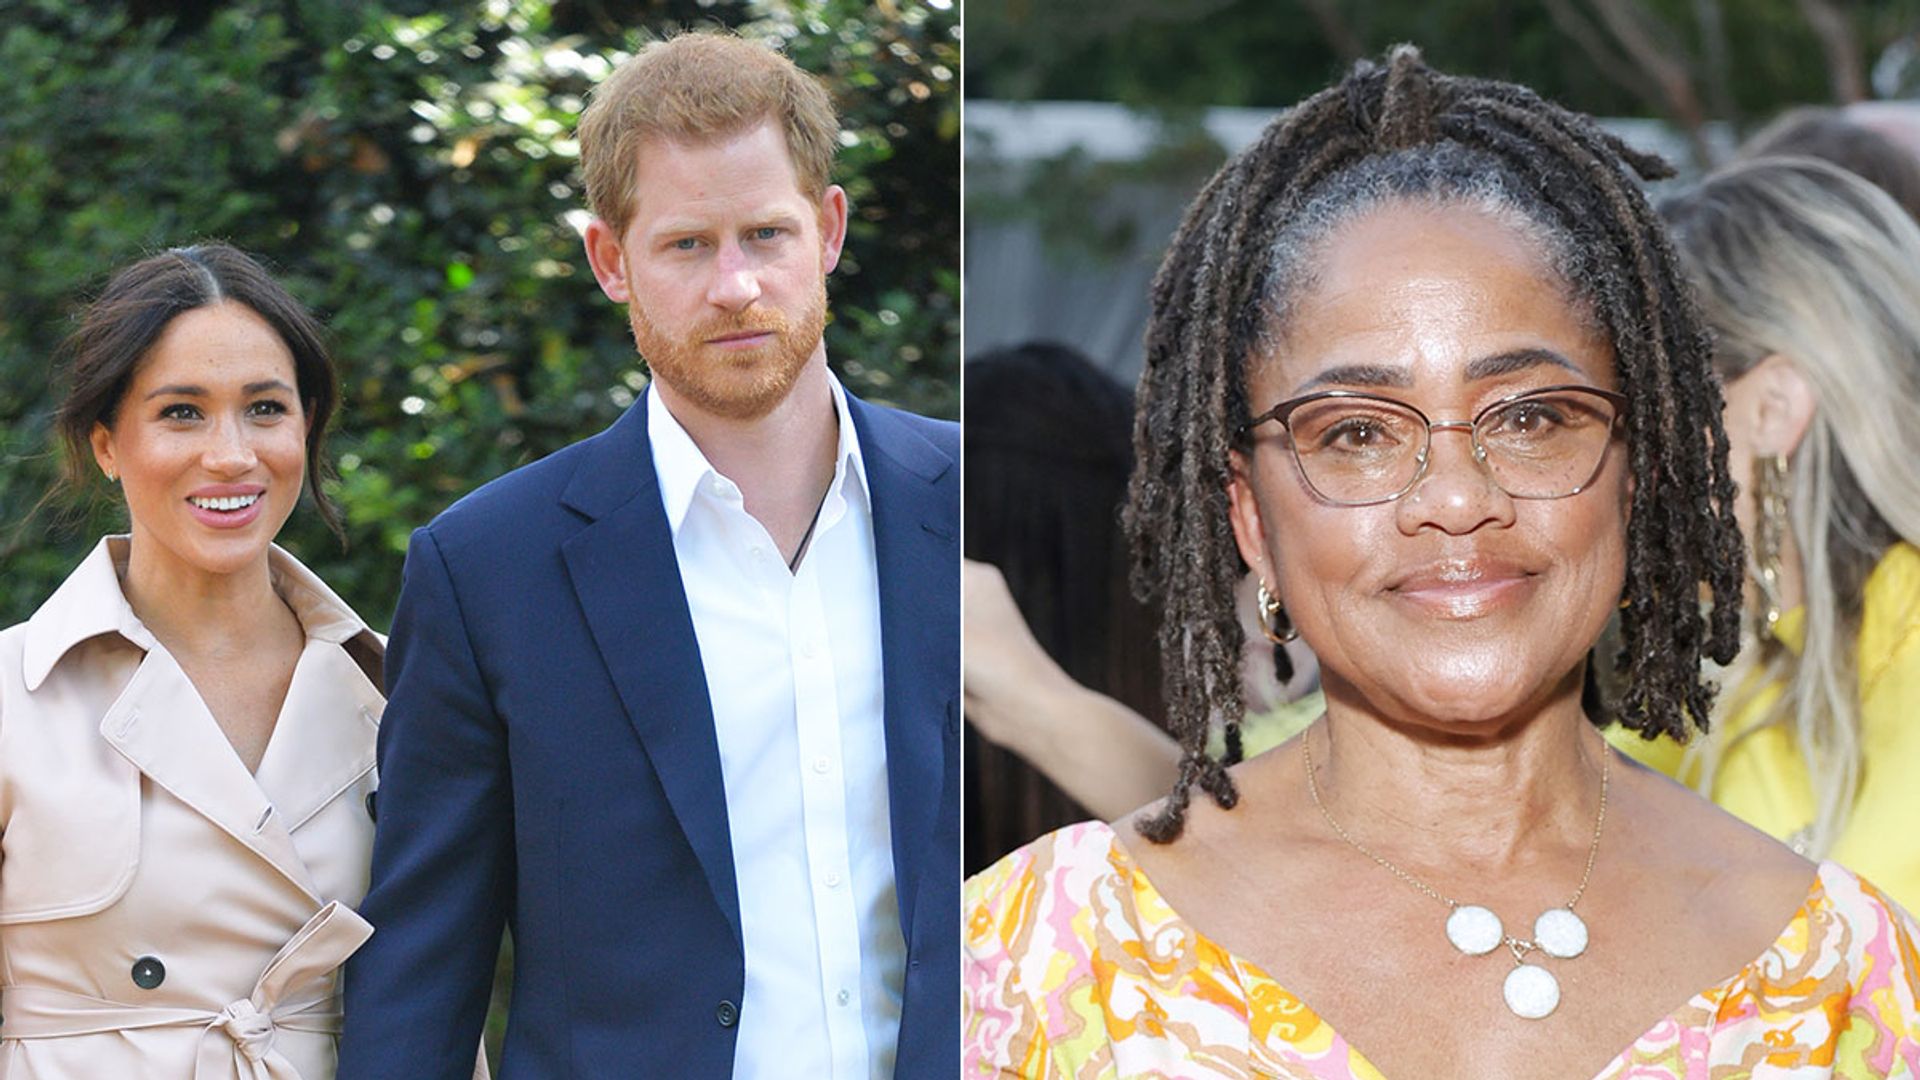 Meghan Markle's fashionista mother Doria Ragland surprises in new photo with Beyonce's mom